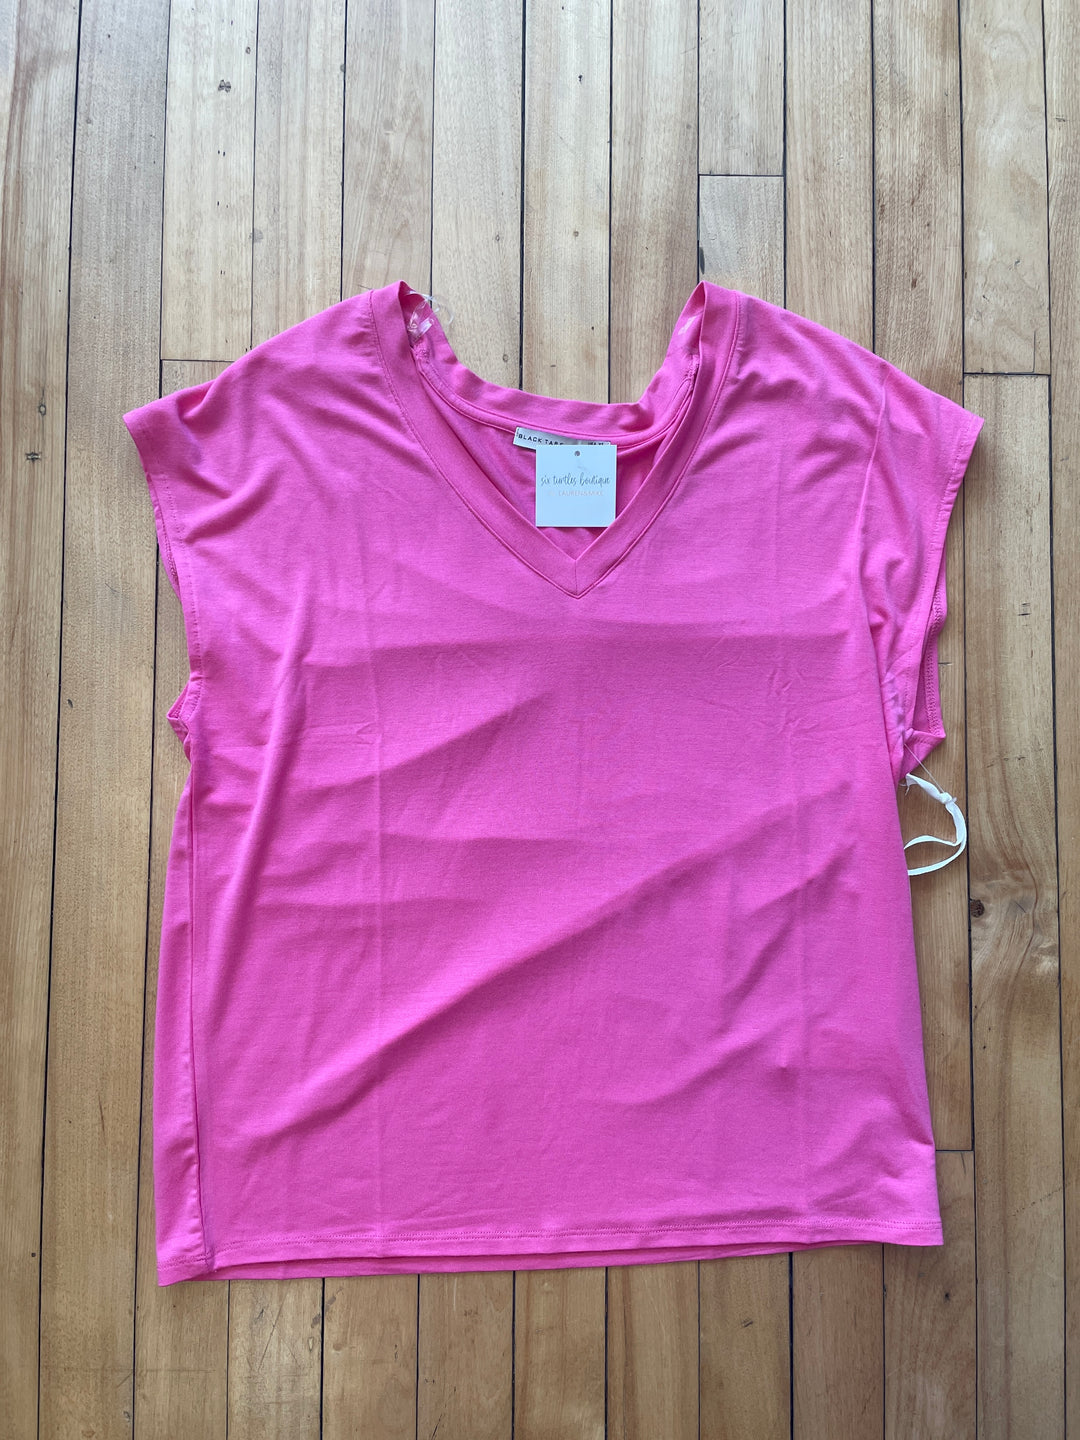 Hot Pink Knit Tee